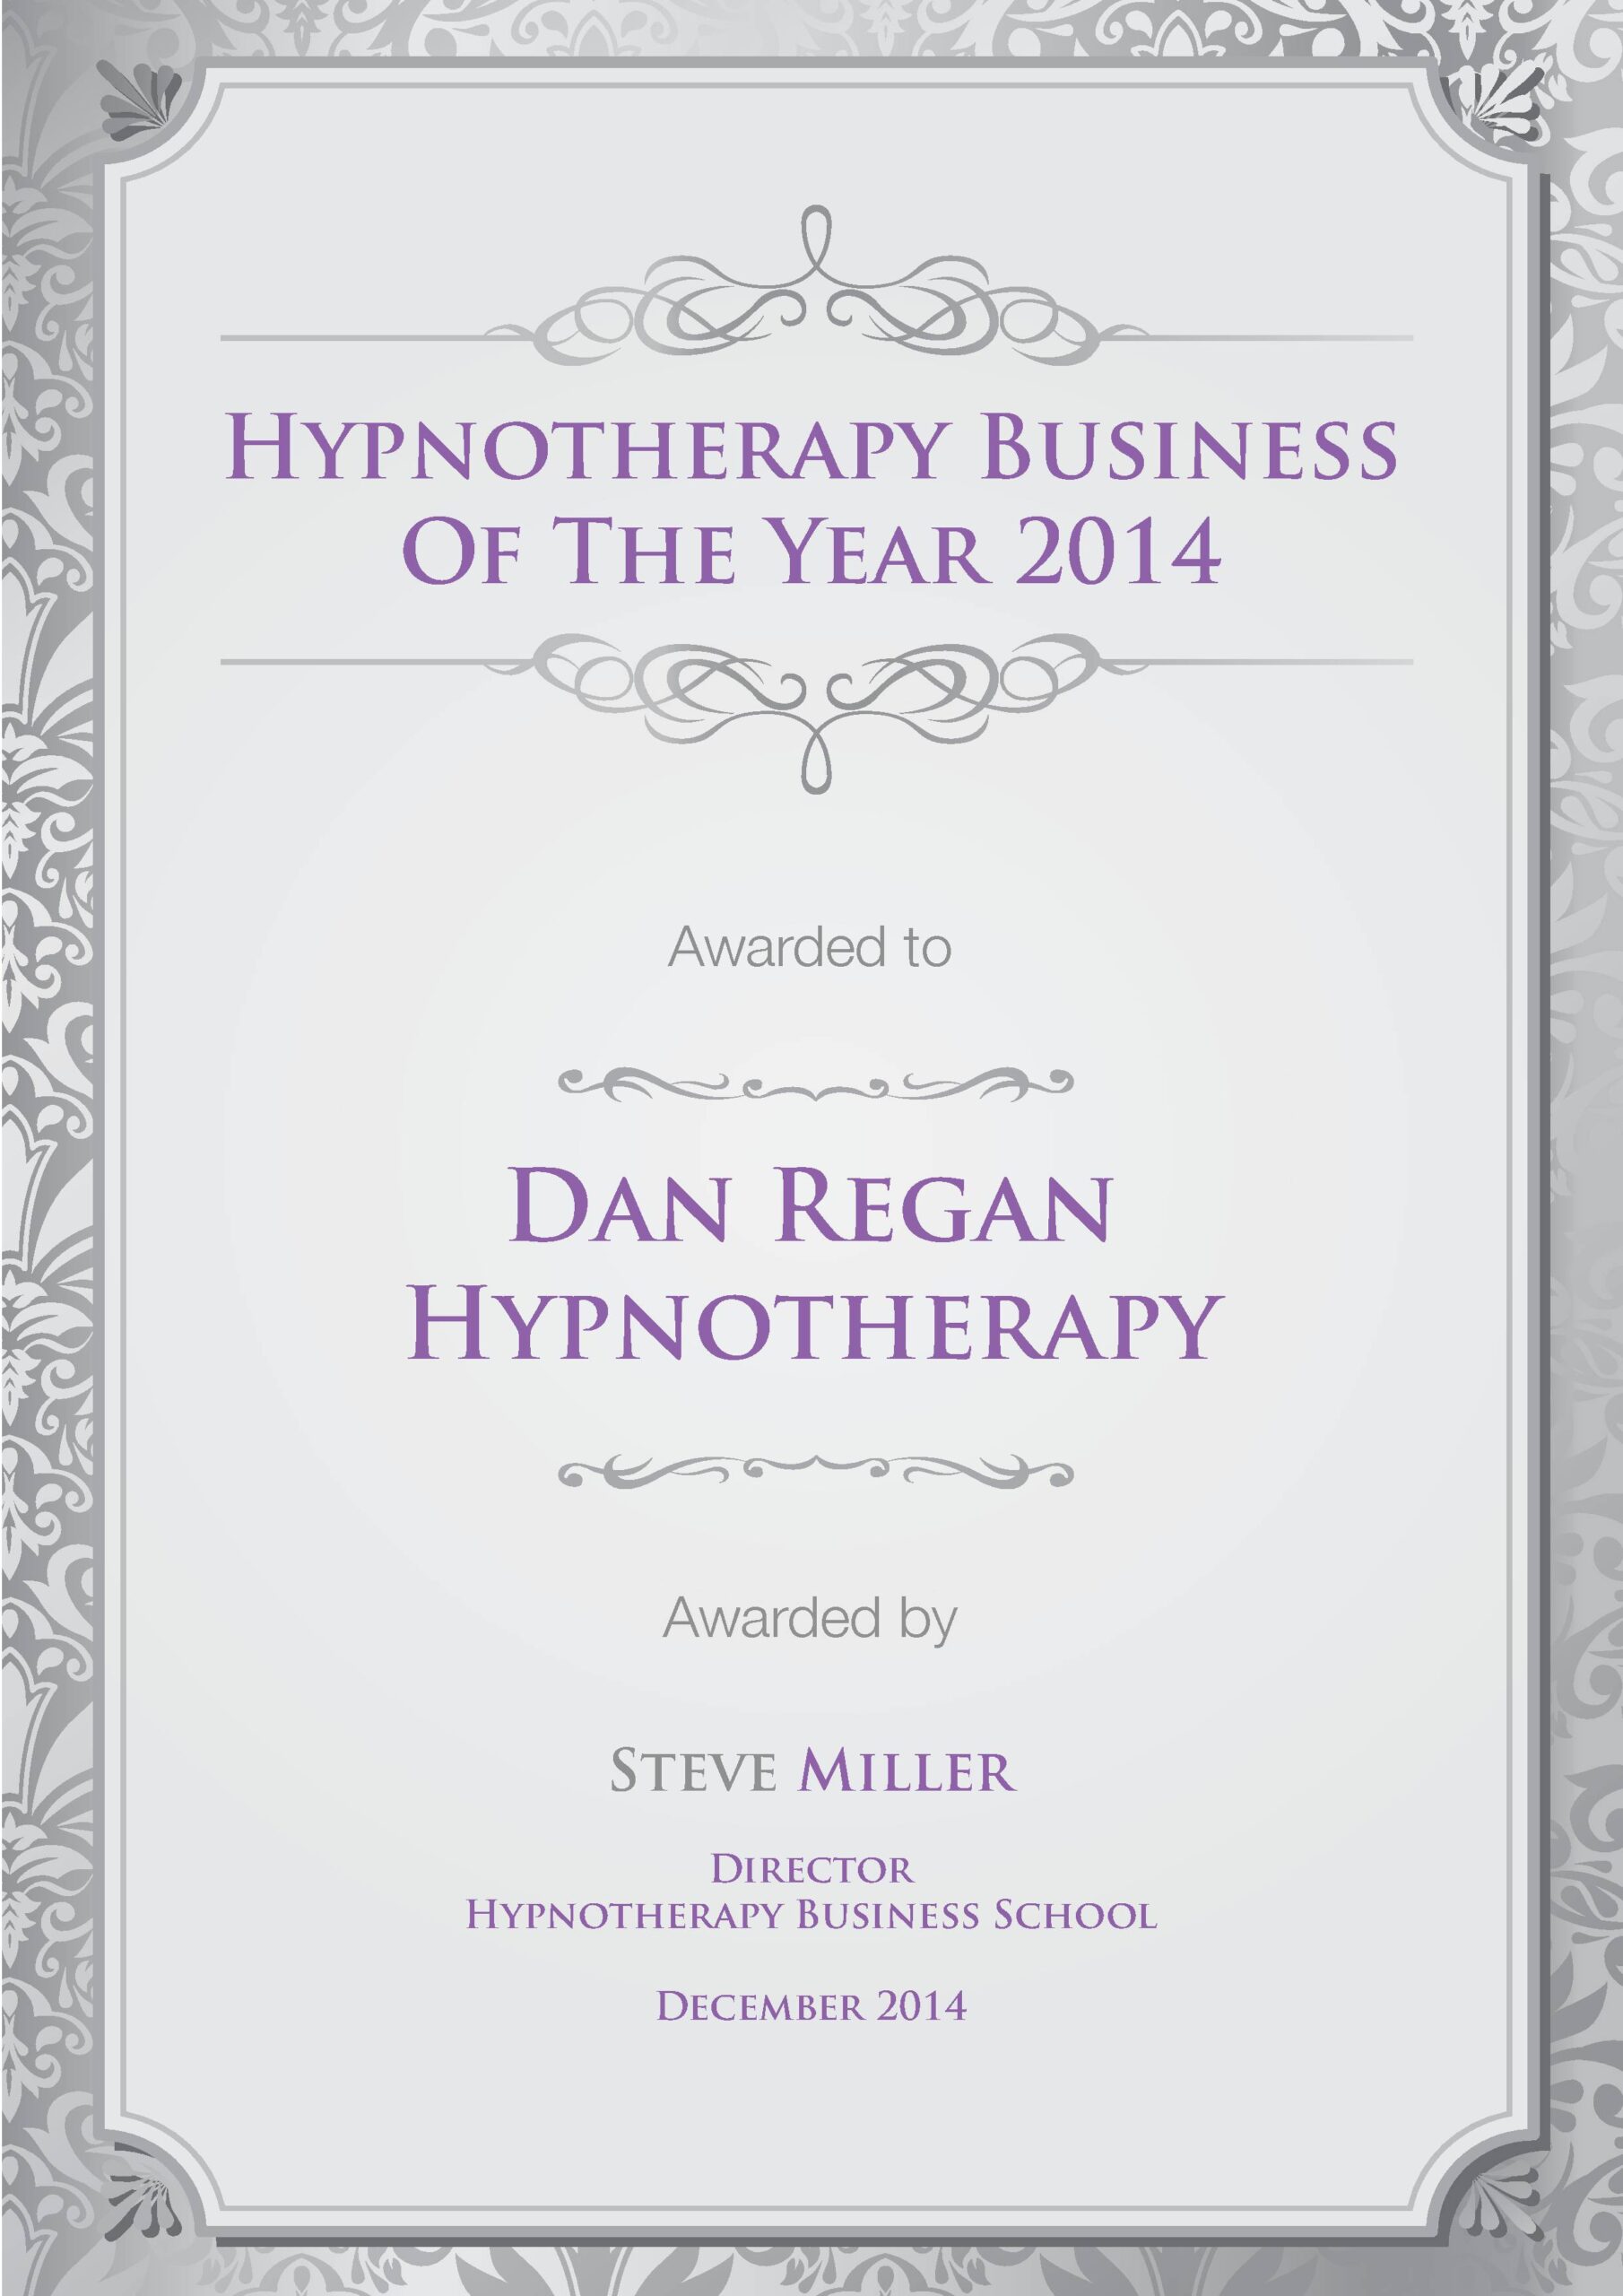 Award Winning Hypnotherapy - Dan Regan Hypnotherapy Business of the Year